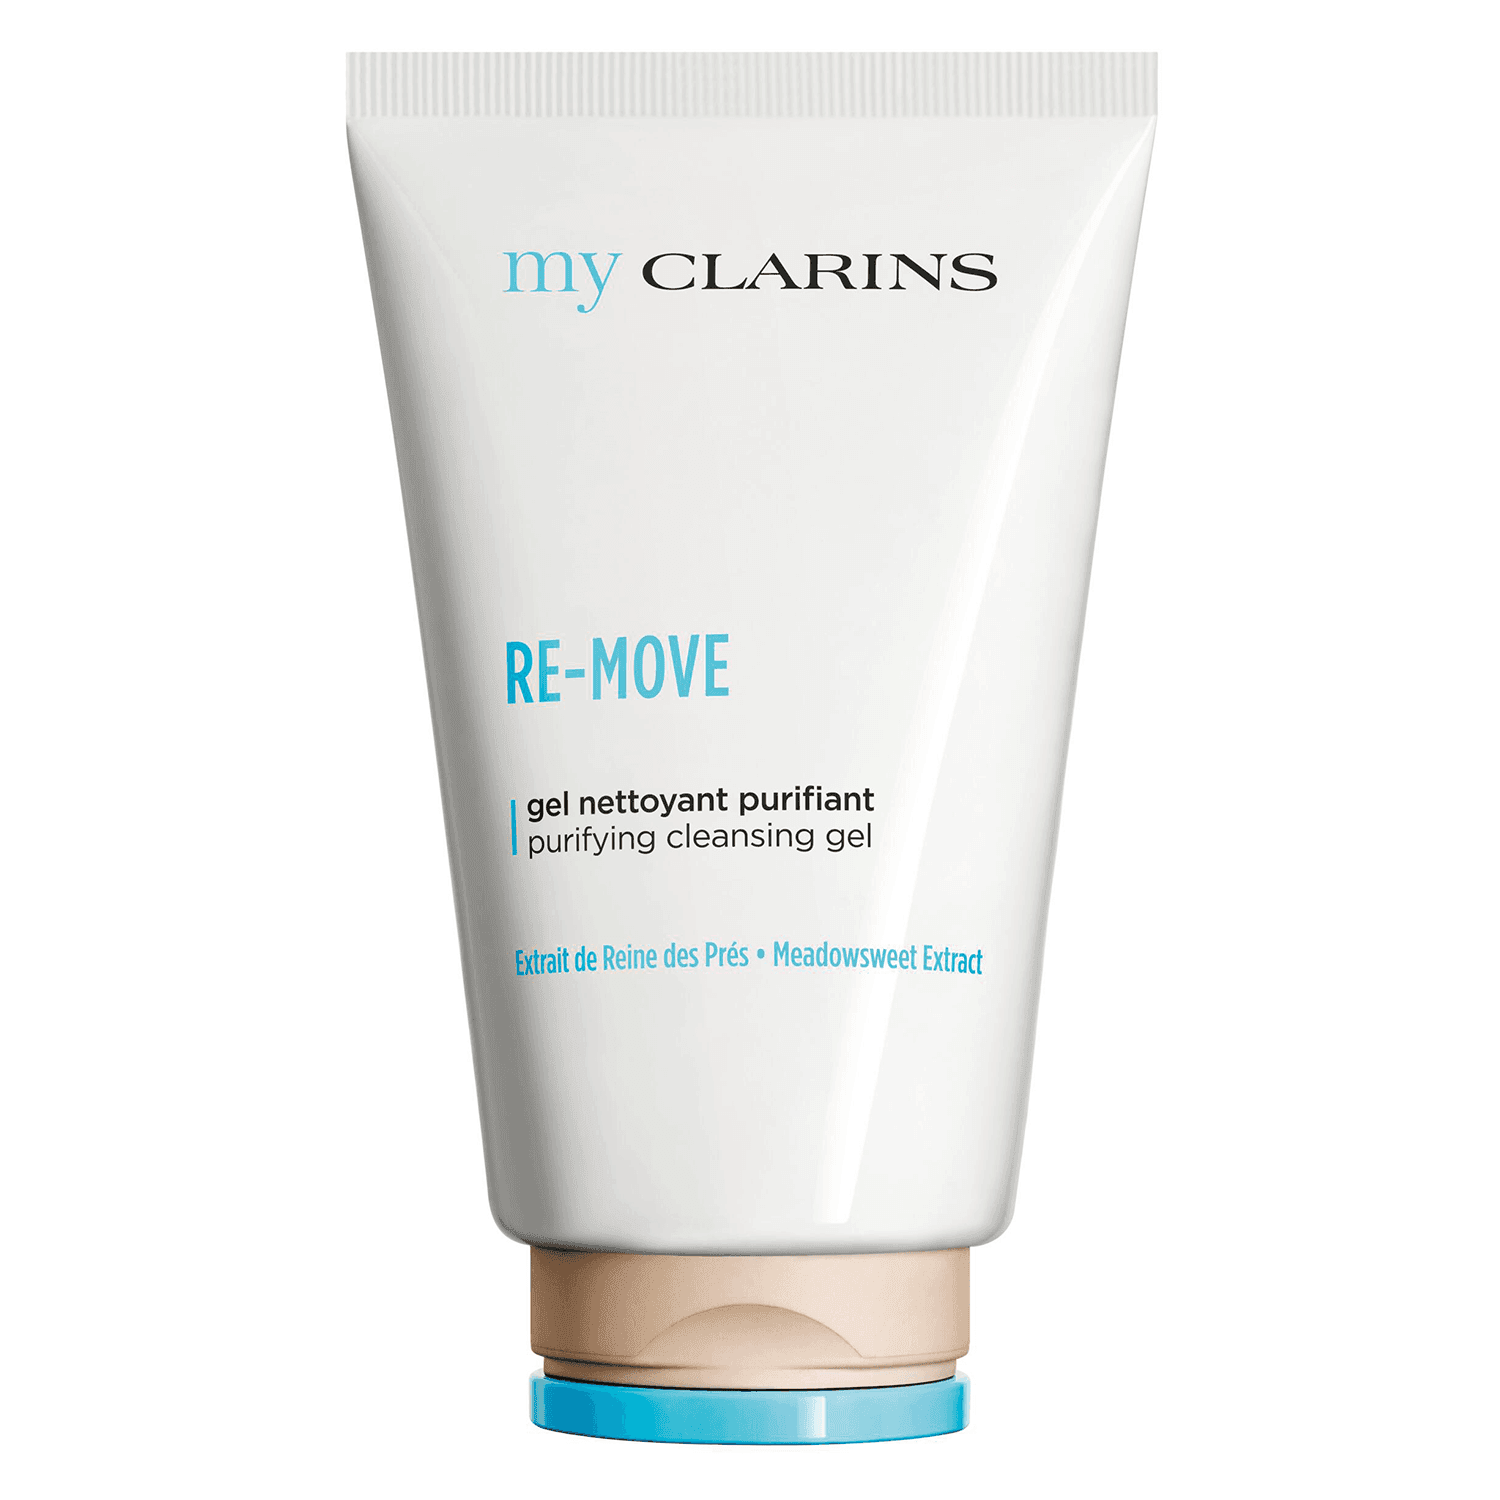 myClarins - MYC PURIFYING CLEANSING GEL - RETAIL PRODUCT 125ML